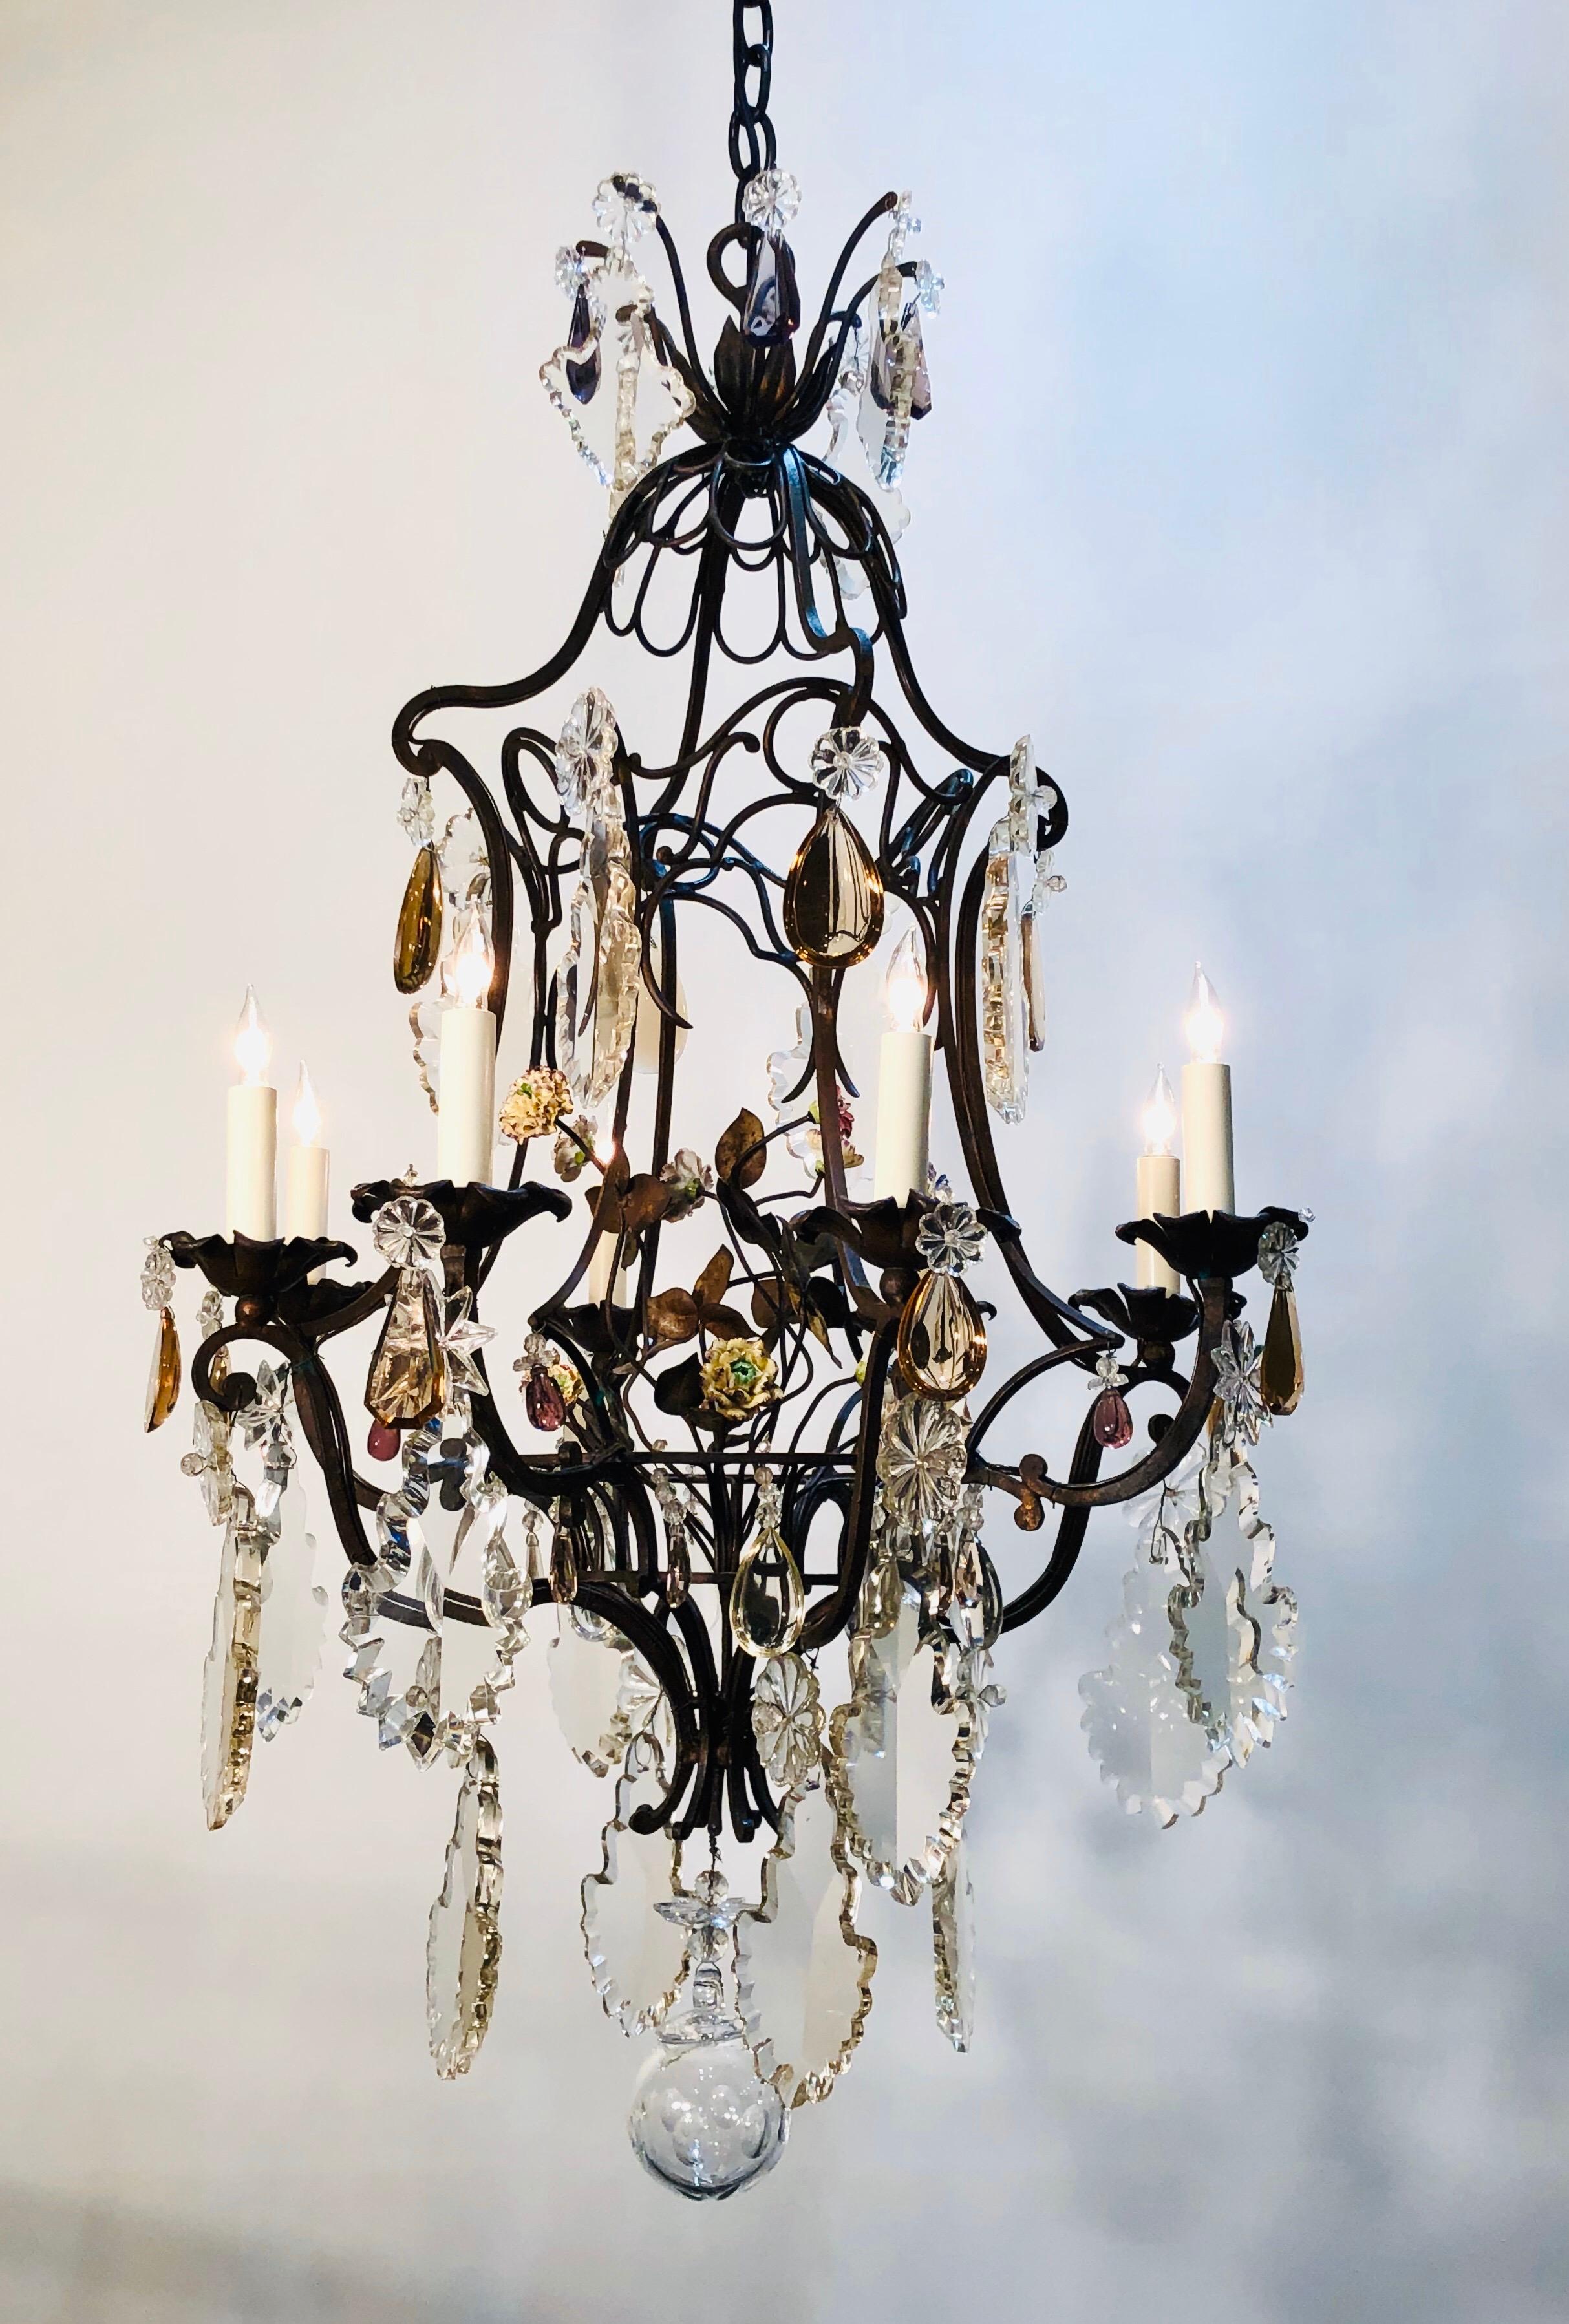 This beautiful French wrought iron chandelier has a bird cage frame with a scrolled pagoda crown. The center of the bird cage has a basket with iron and porcelain flowers. The eight iron arm were originally candle and have been French wire and